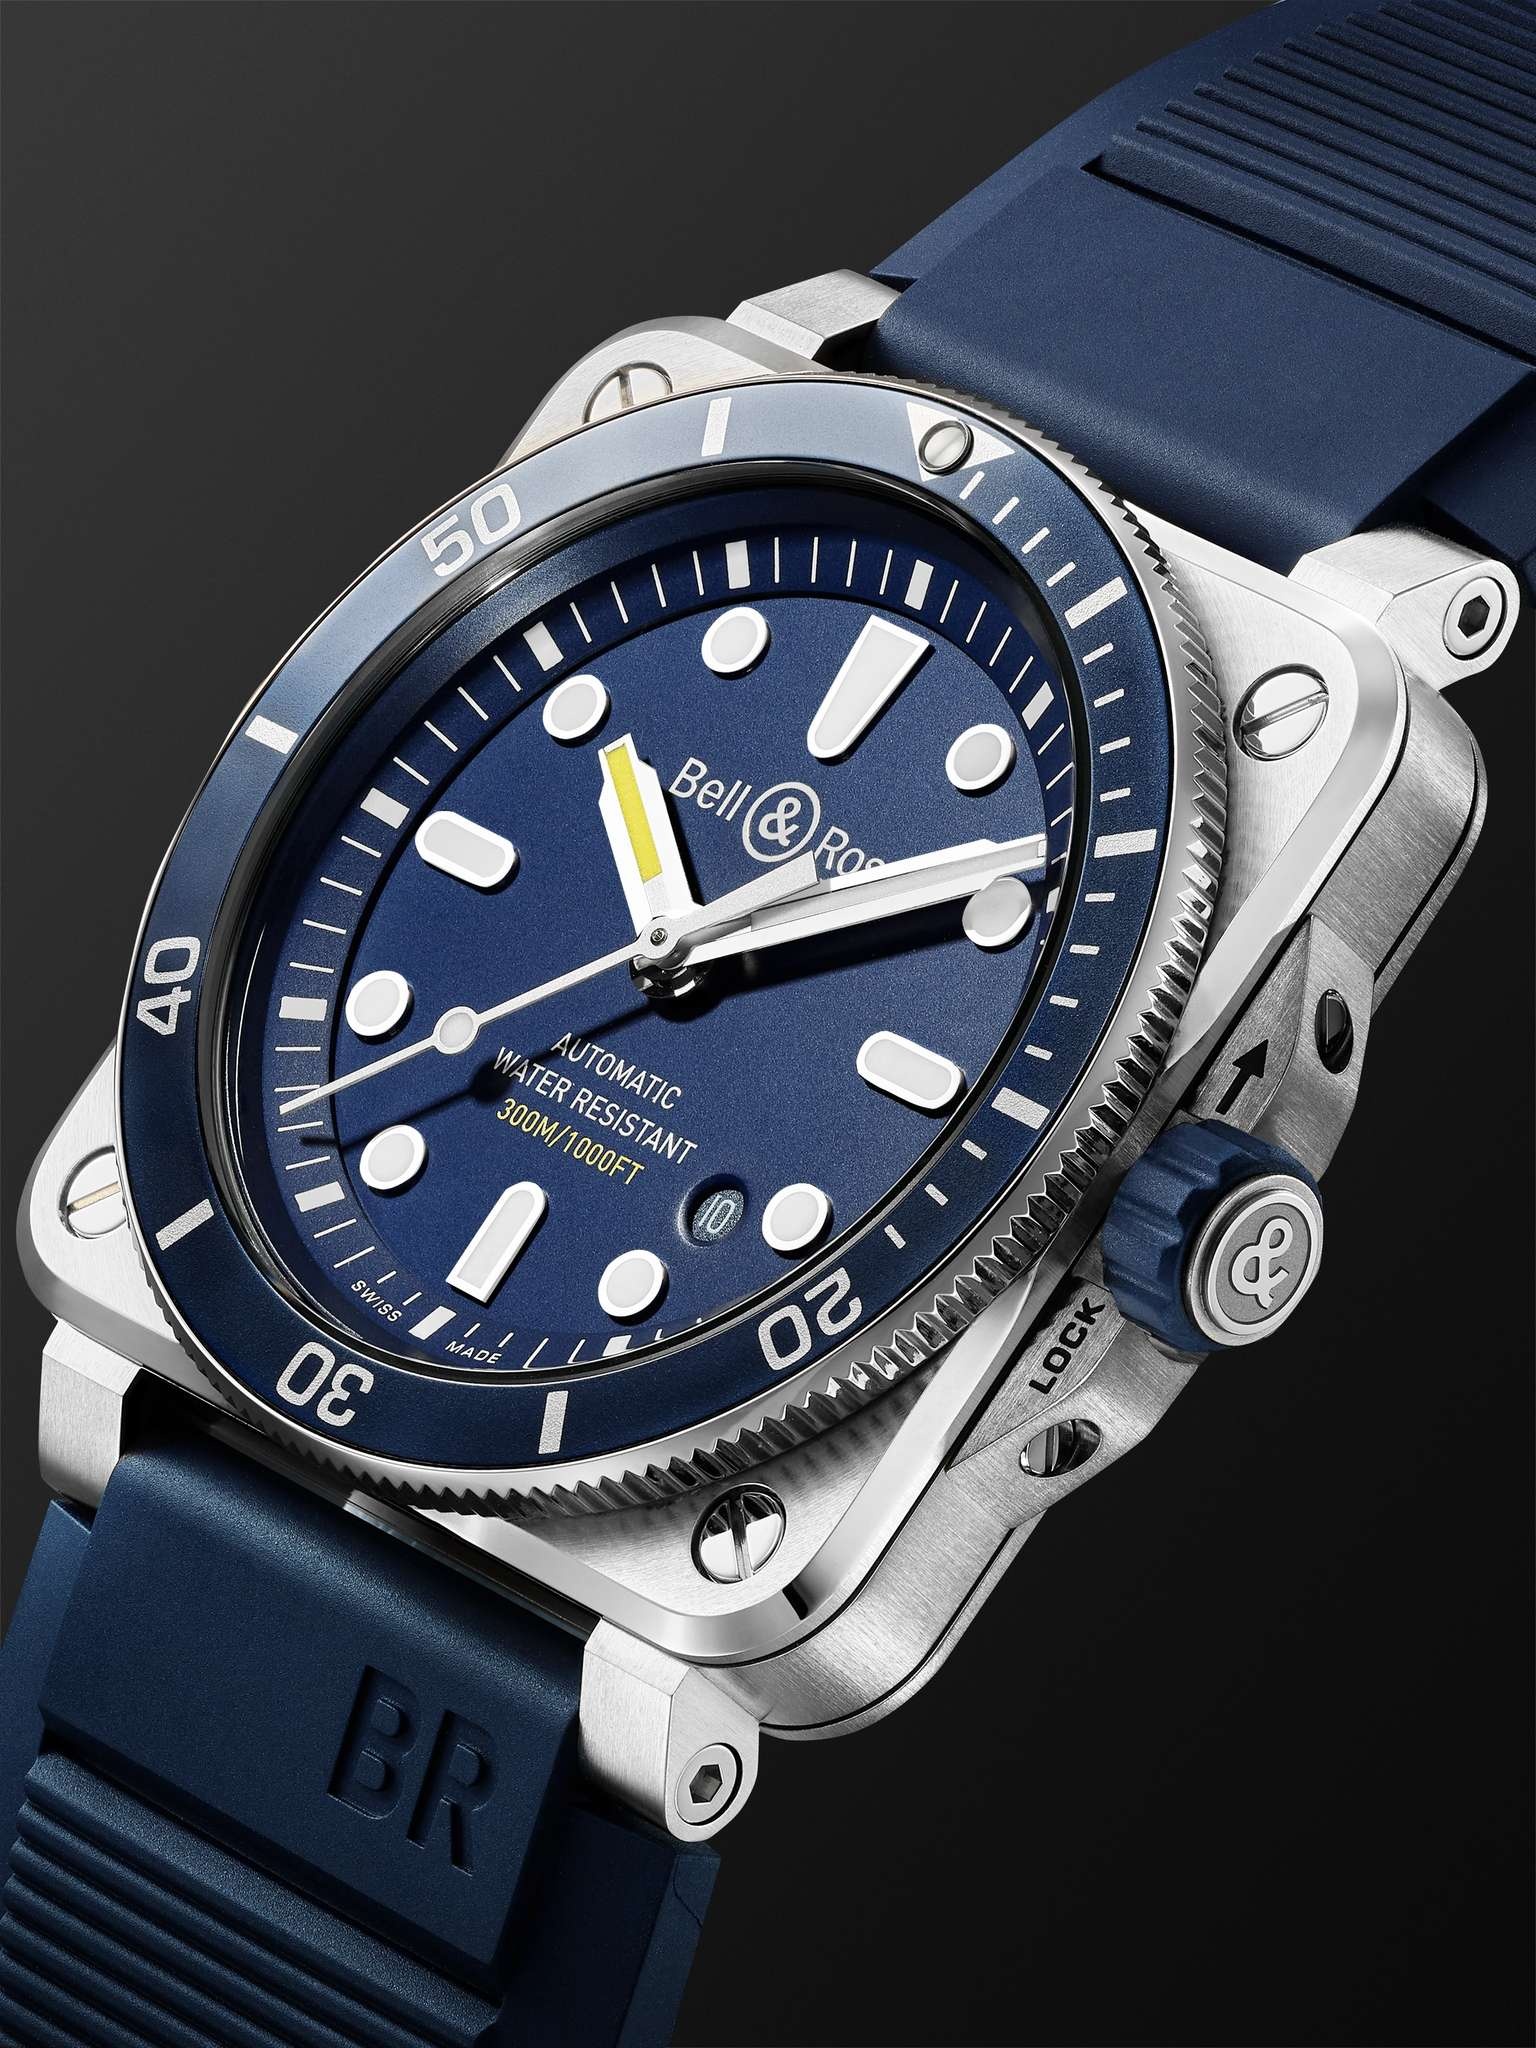 BR 03-92 Diver Blue Automatic 42mm Stainless Steel and Rubber Watch, Ref. No. BR0392-D-BU-ST/SRB - 3